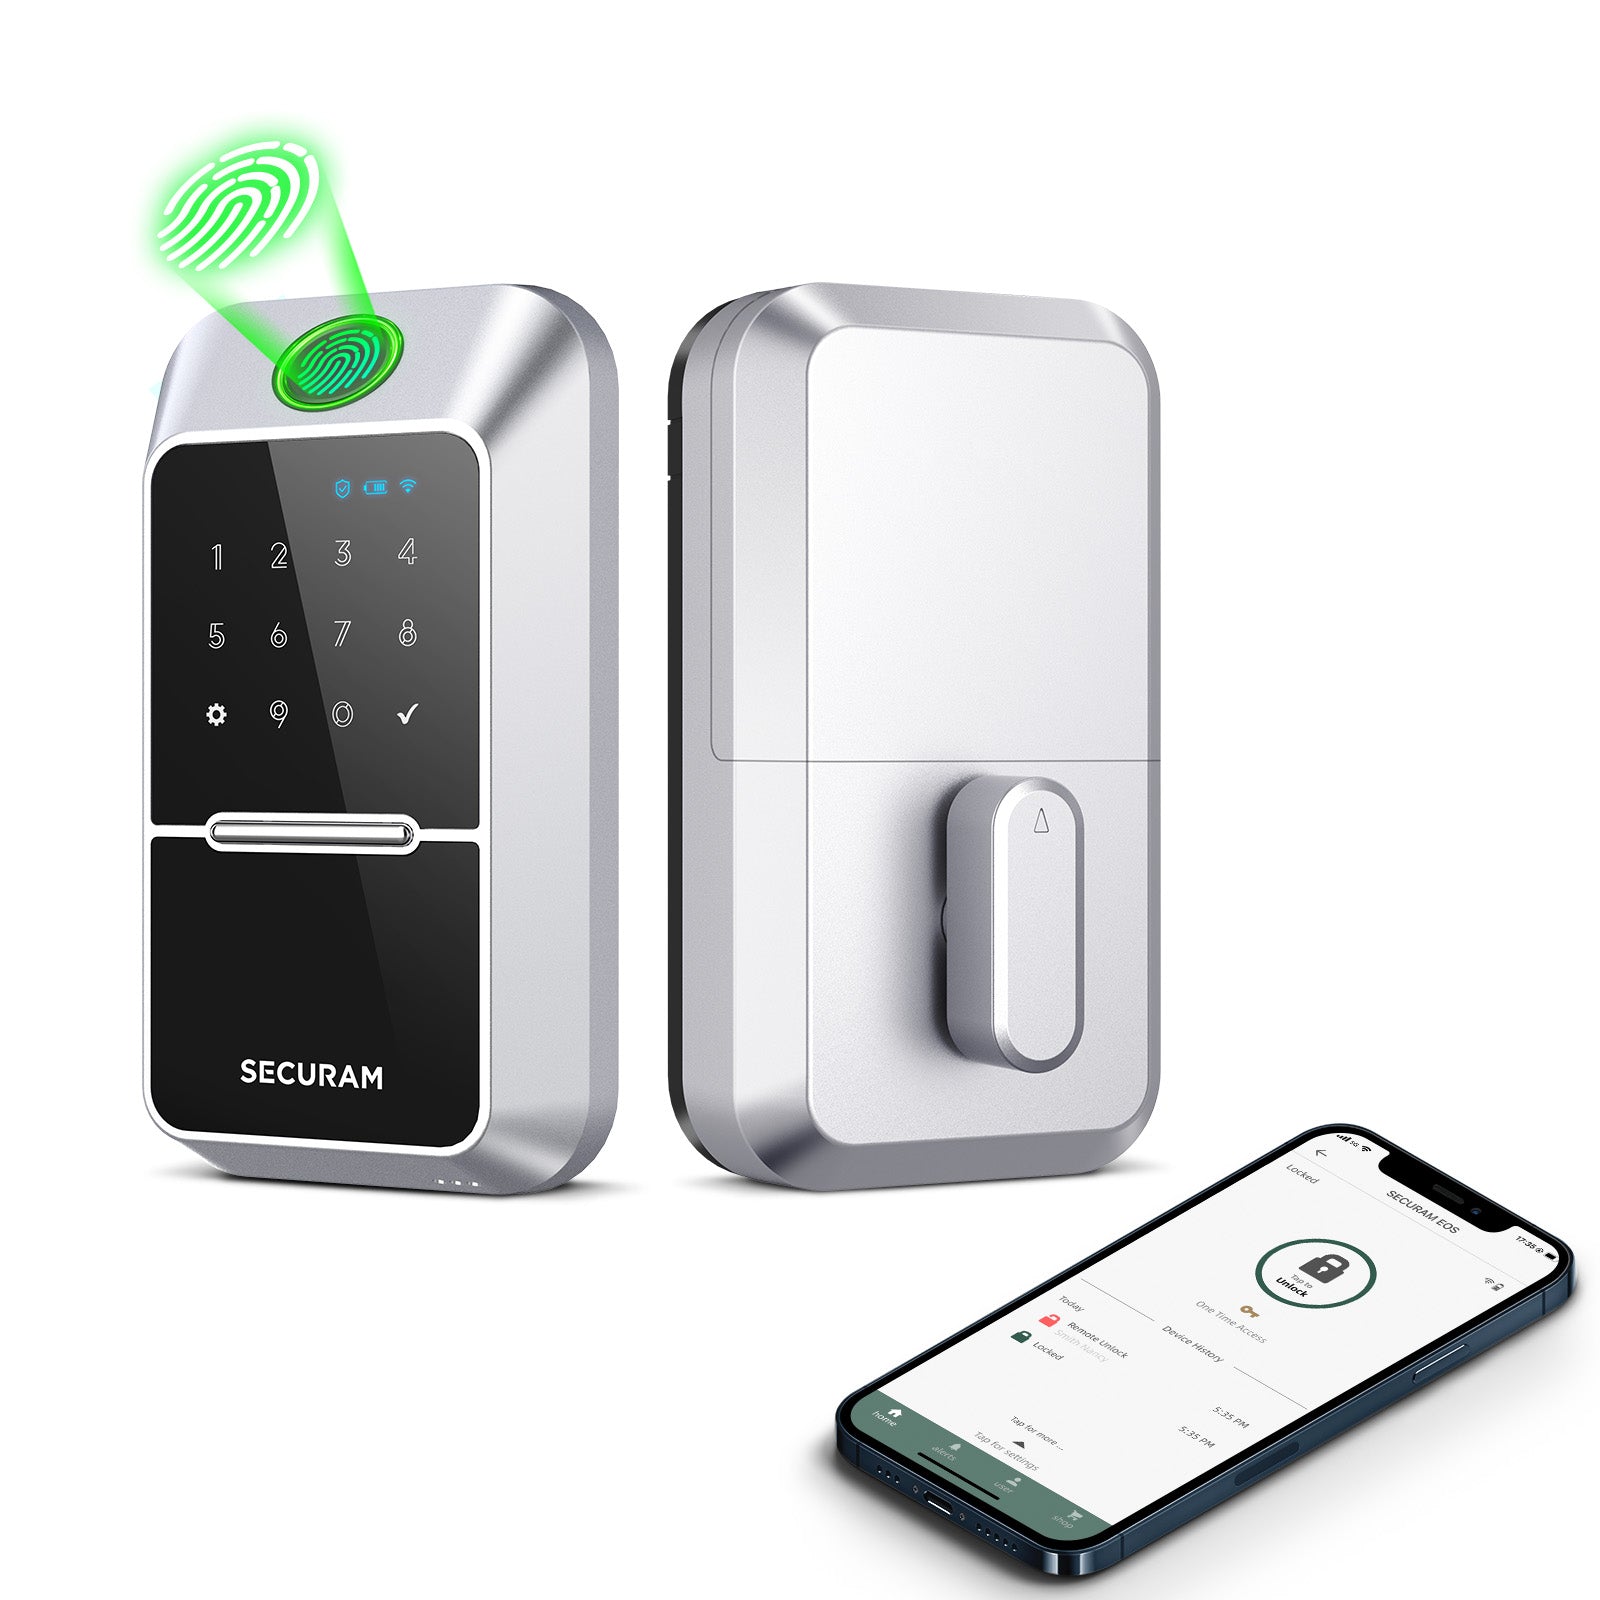 A SECURAM EOS Wi-Fi Smart Lock with a smart phone next to it.